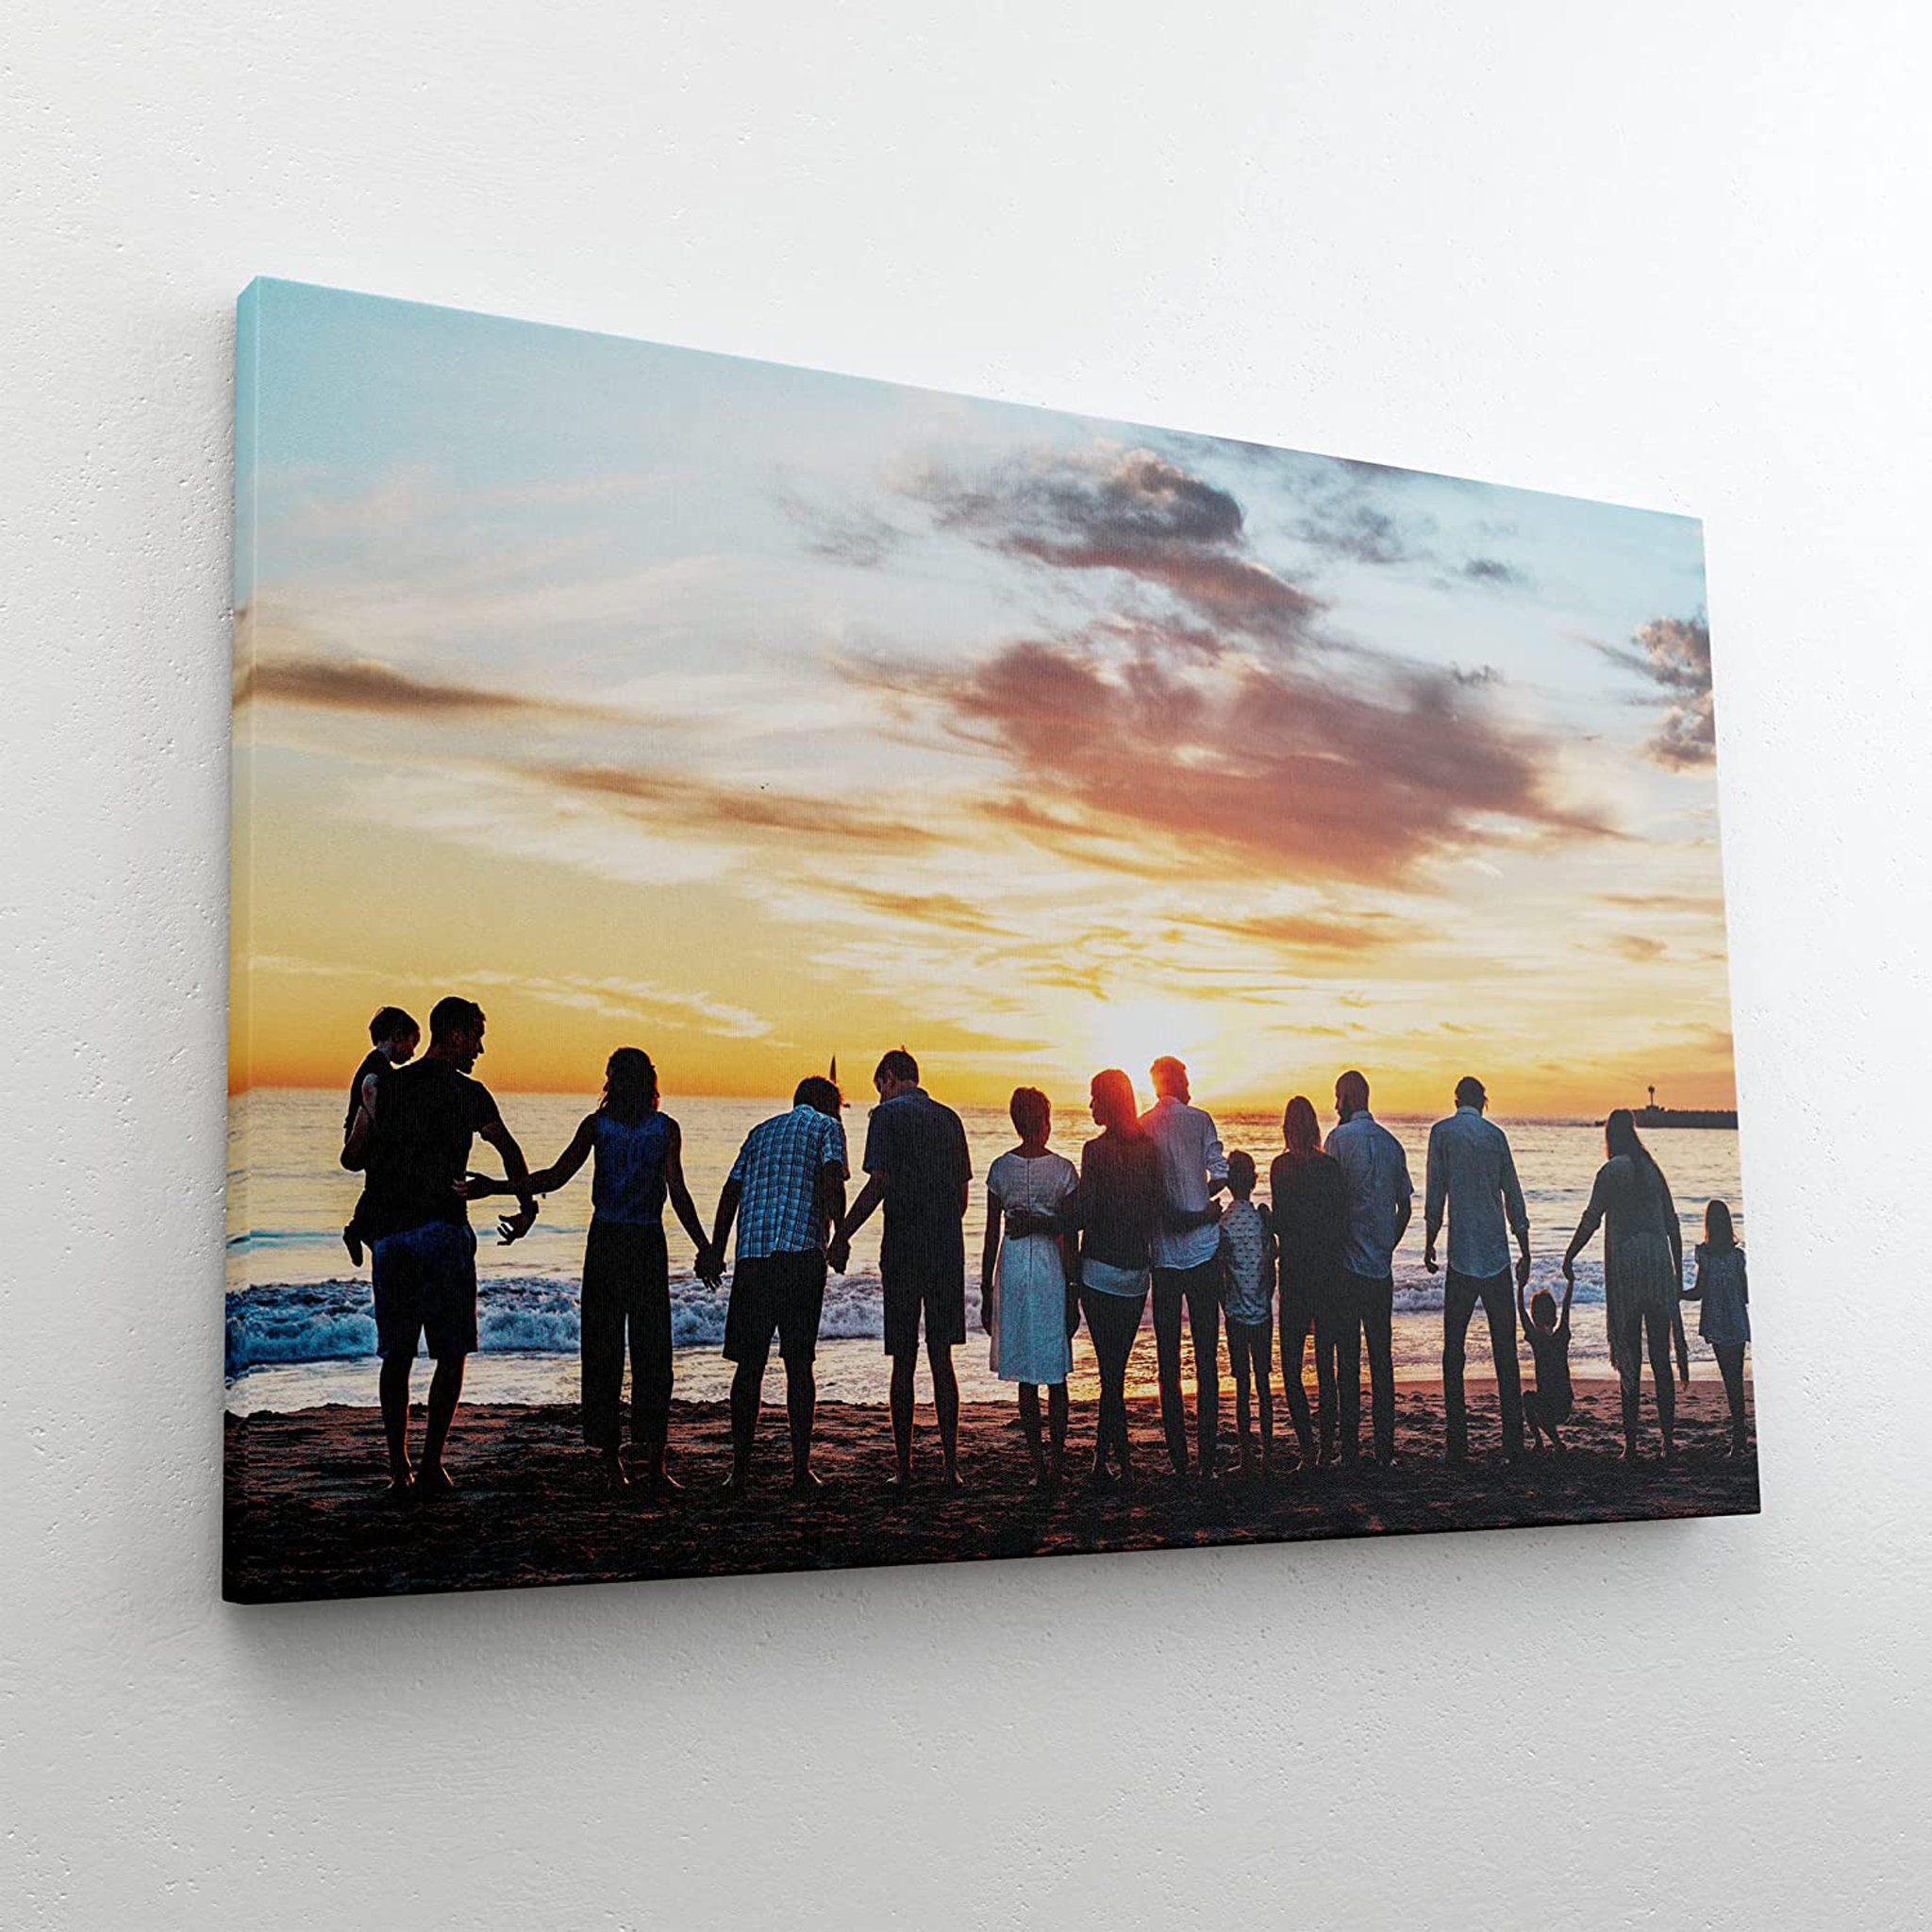 Custom Canvas Prints with Your Photos - Personalized Photo Gifts Framed Canvas Wall Art - Floating Frames & Gift Wrapping Available (8 Wx6 H)